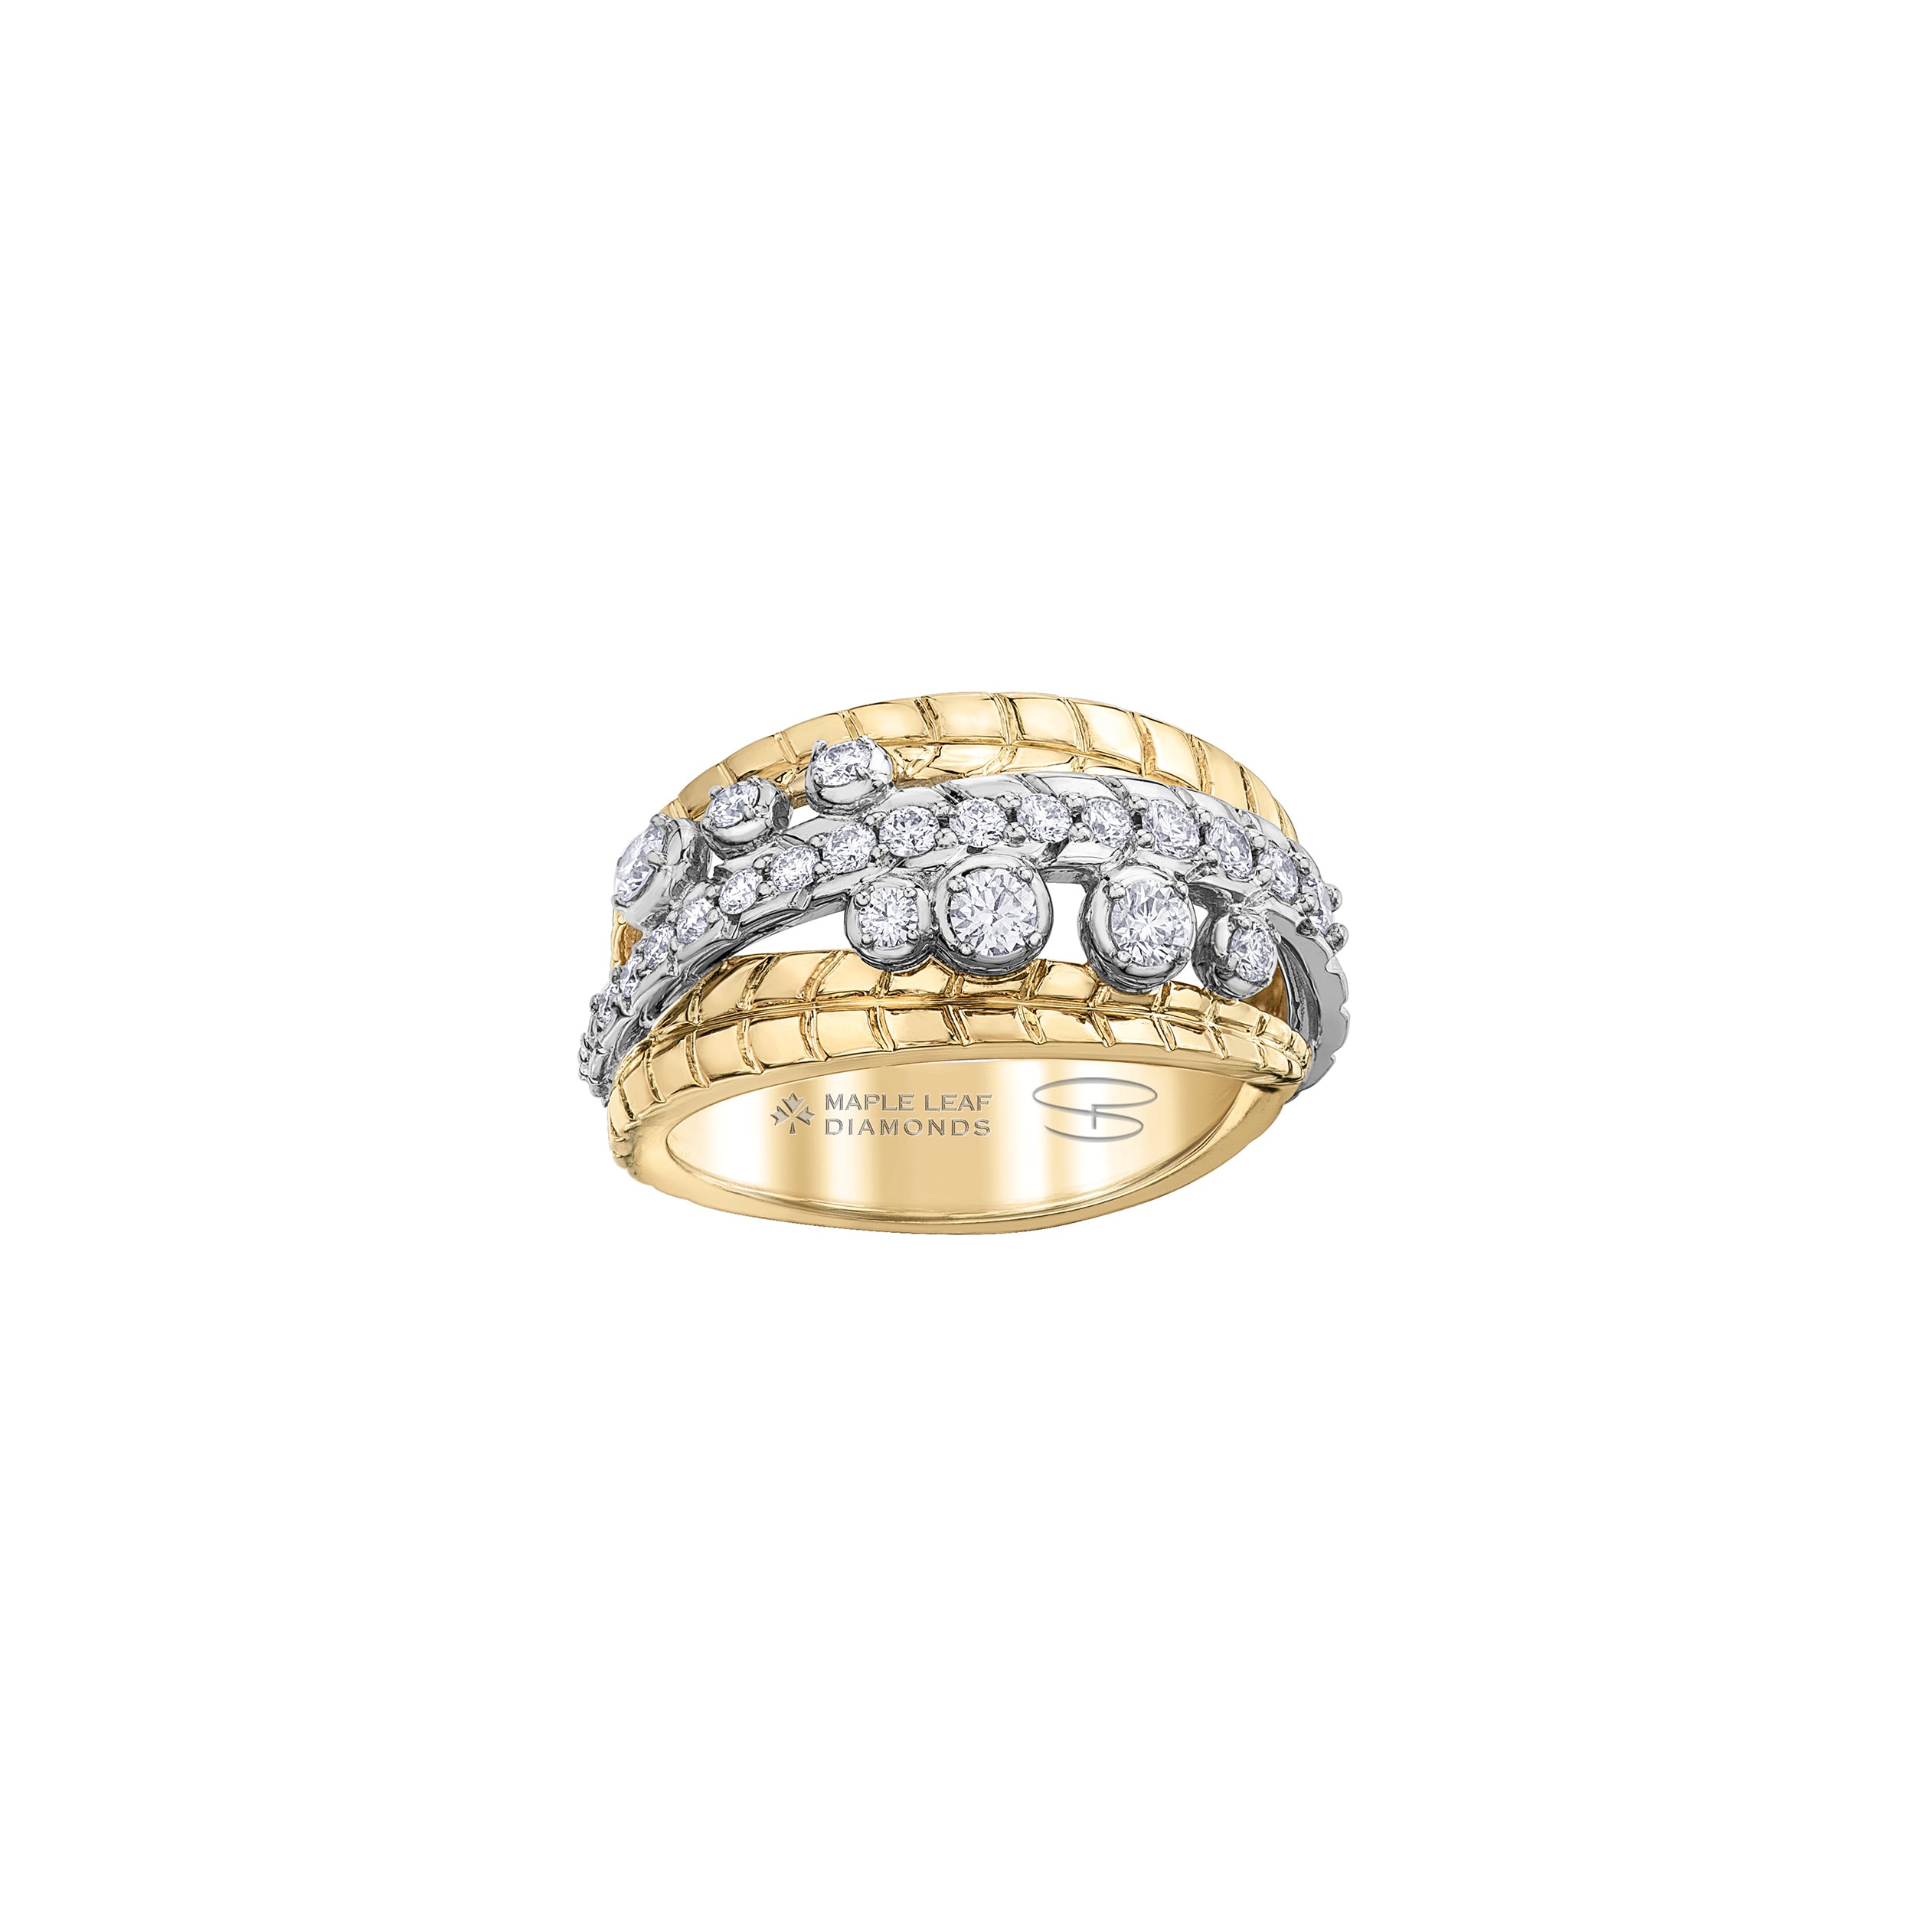 This ring features 14KT white Certified Canadian Gold set with a row of round brilliant-cut Canadian diamonds with accent Canadian diamonds, all between two 14KT yellow Certified Canadian Gold leaves.